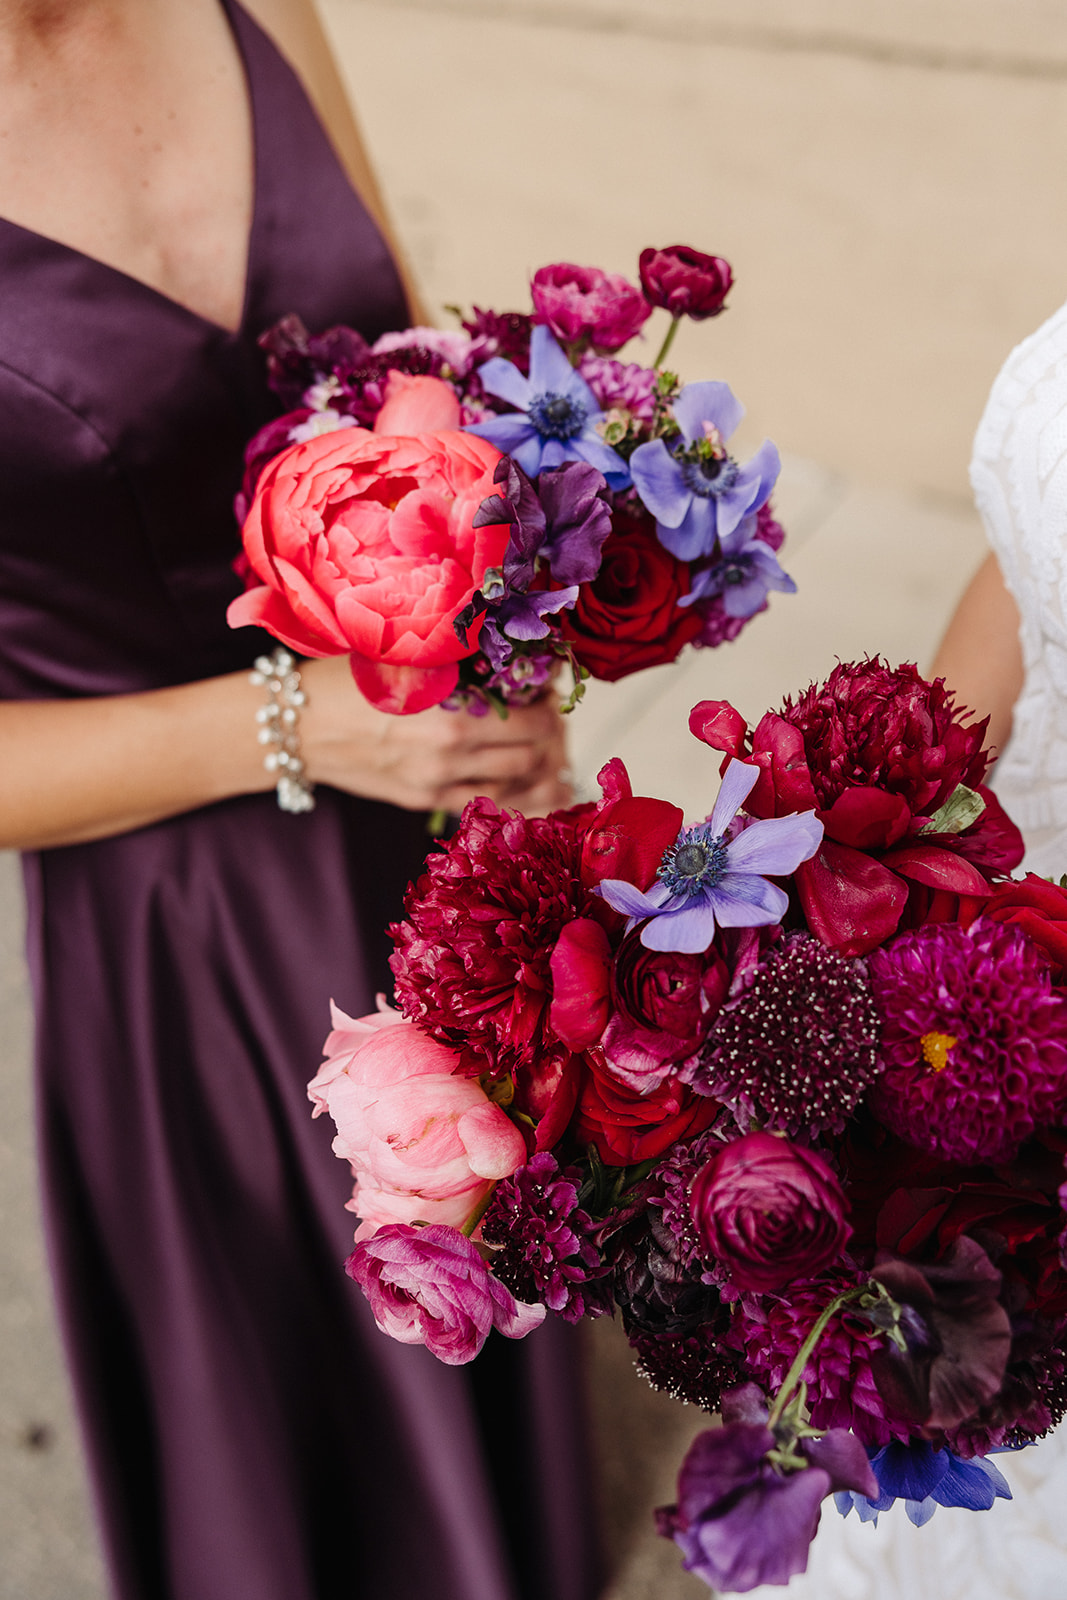 Purple and pink wedding bouquets that go beautifully with the maid of honor's purple dress.